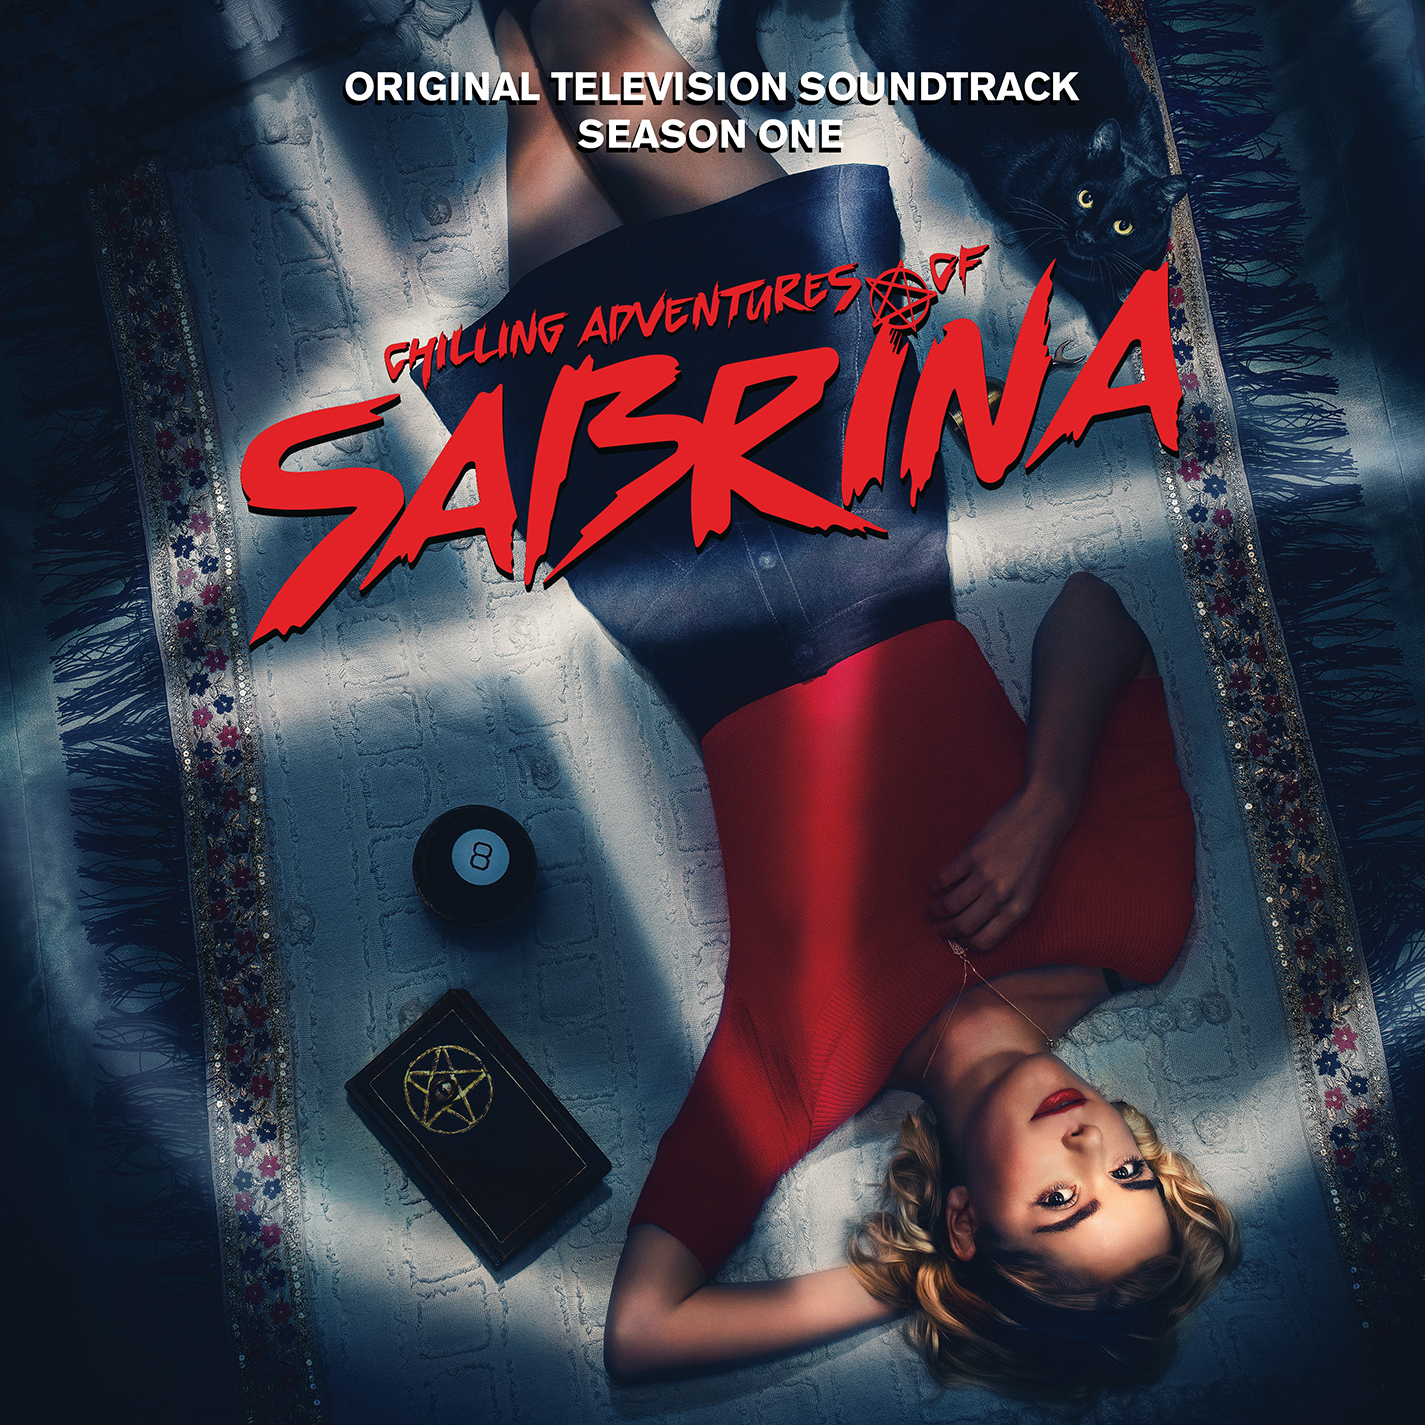 Chilling Adventures Of Sabrina Season One Soundtrack Now Available Business Wire - 16 shots roblox id full song